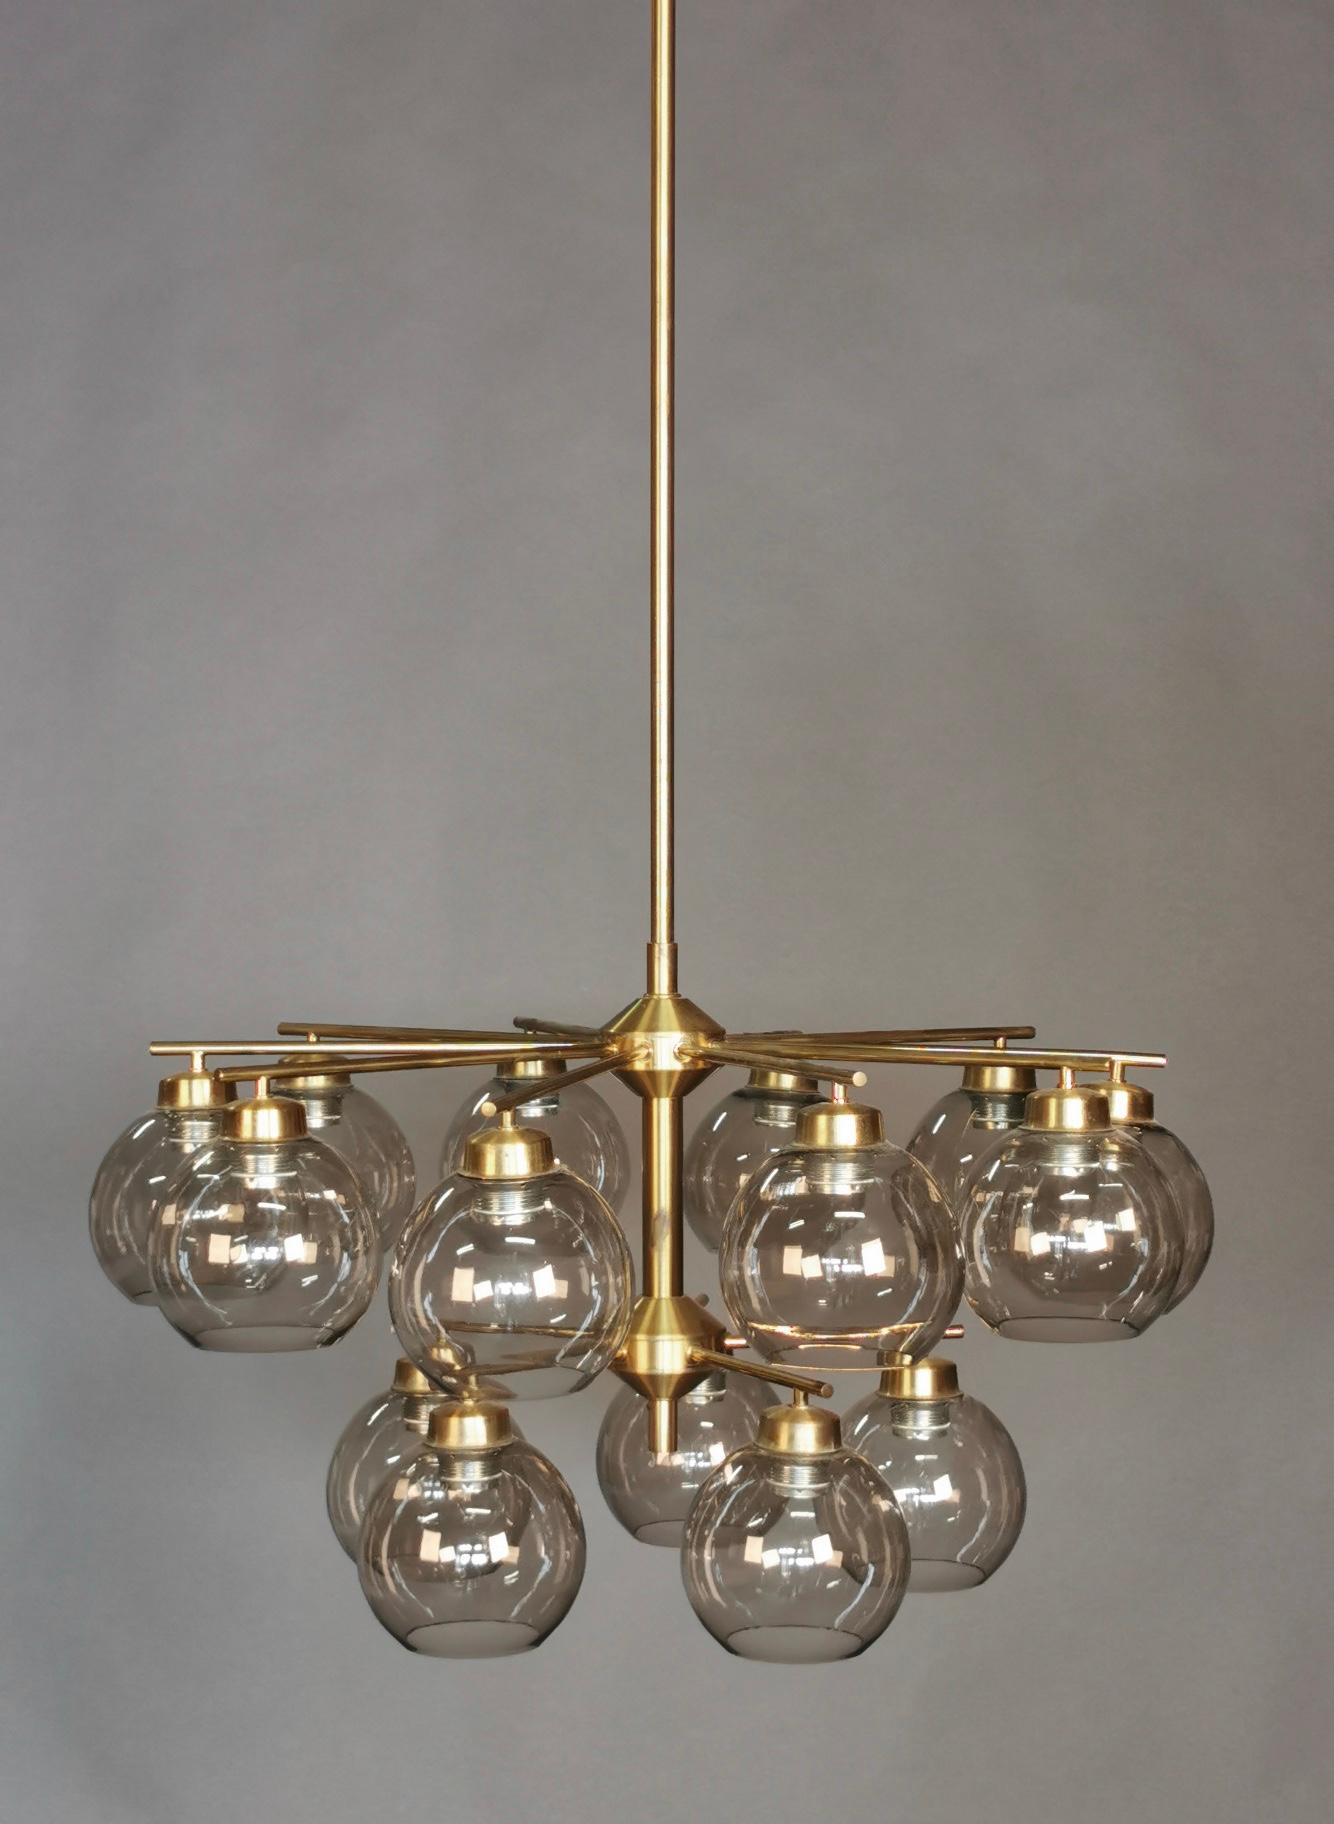 Chandelier by Holger Johansson, Westal, 15 lights, spherical cups in smoked glass.
Manufactured in Sweden in the 1950s.
 